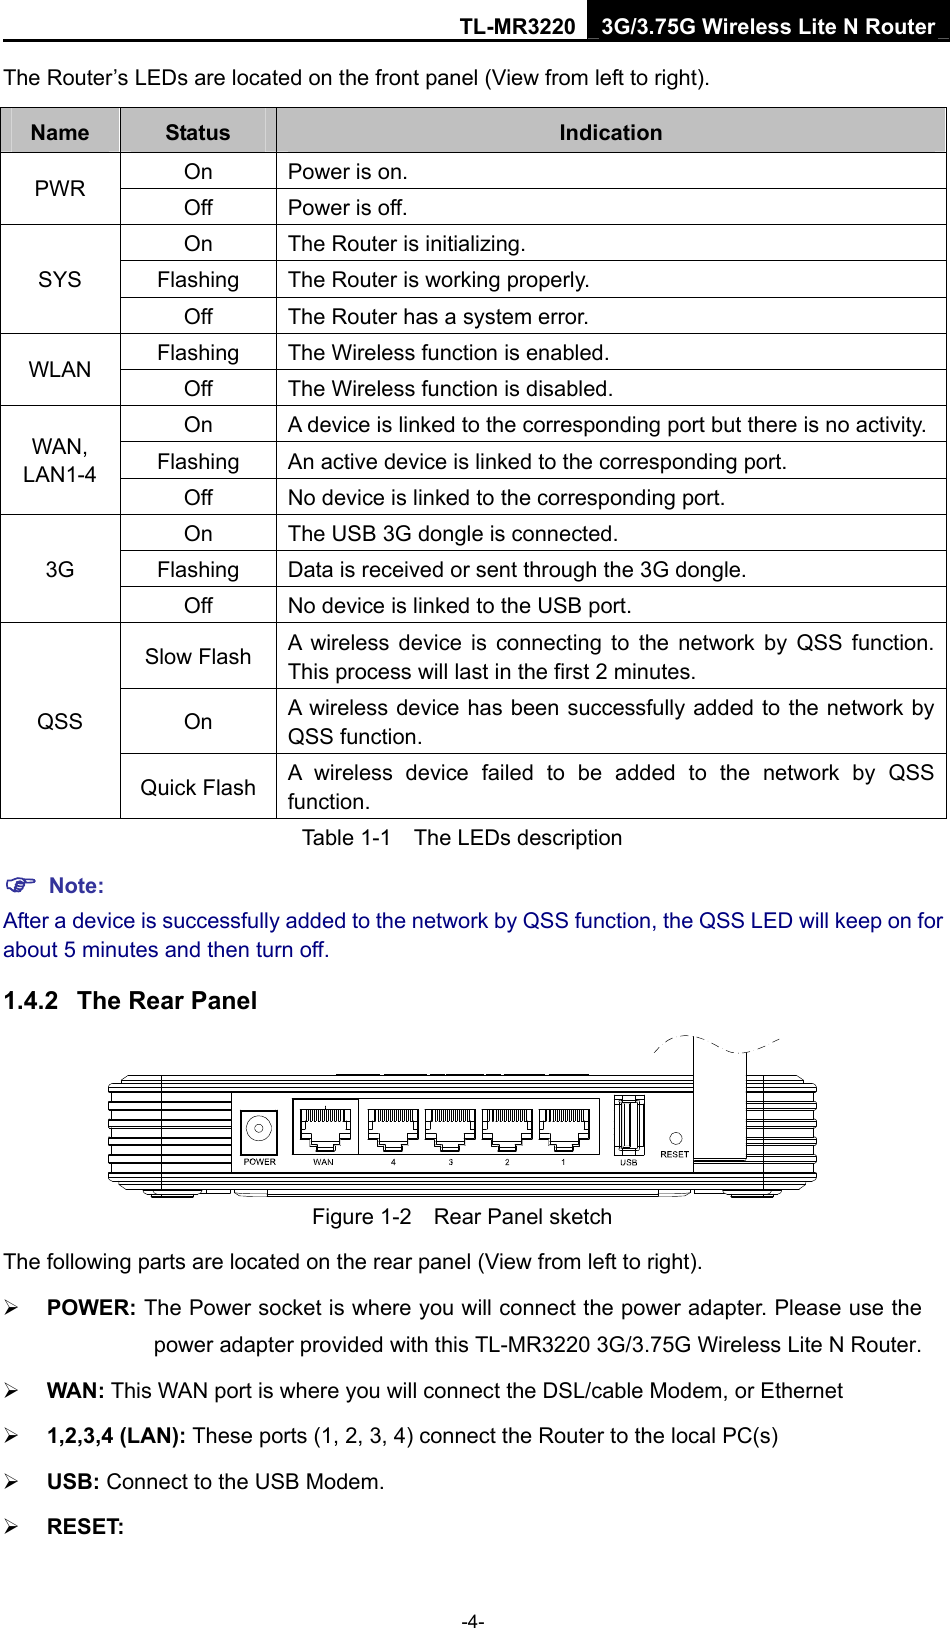 TL-MR3220 3G/3.75G Wireless Lite N Router -4- The Router’s LEDs are located on the front panel (View from left to right).   Name  Status  Indication On  Power is on. PWR  Off  Power is off. On  The Router is initializing. Flashing  The Router is working properly. SYS Off  The Router has a system error. Flashing  The Wireless function is enabled. WLAN  Off  The Wireless function is disabled. On  A device is linked to the corresponding port but there is no activity.Flashing  An active device is linked to the corresponding port. WAN, LAN1-4  Off  No device is linked to the corresponding port. On  The USB 3G dongle is connected. Flashing  Data is received or sent through the 3G dongle. 3G Off  No device is linked to the USB port. Slow Flash  A wireless device is connecting to the network by QSS function. This process will last in the first 2 minutes. On  A wireless device has been successfully added to the network by QSS function.   QSS Quick Flash  A wireless device failed to be added to the network by QSS function. Table 1-1    The LEDs description ) Note: After a device is successfully added to the network by QSS function, the QSS LED will keep on for about 5 minutes and then turn off. 1.4.2  The Rear Panel  Figure 1-2    Rear Panel sketch The following parts are located on the rear panel (View from left to right). ¾ POWER: The Power socket is where you will connect the power adapter. Please use the power adapter provided with this TL-MR3220 3G/3.75G Wireless Lite N Router.   ¾ WAN: This WAN port is where you will connect the DSL/cable Modem, or Ethernet   ¾ 1,2,3,4 (LAN): These ports (1, 2, 3, 4) connect the Router to the local PC(s) ¾ USB: Connect to the USB Modem. ¾ RESET: 